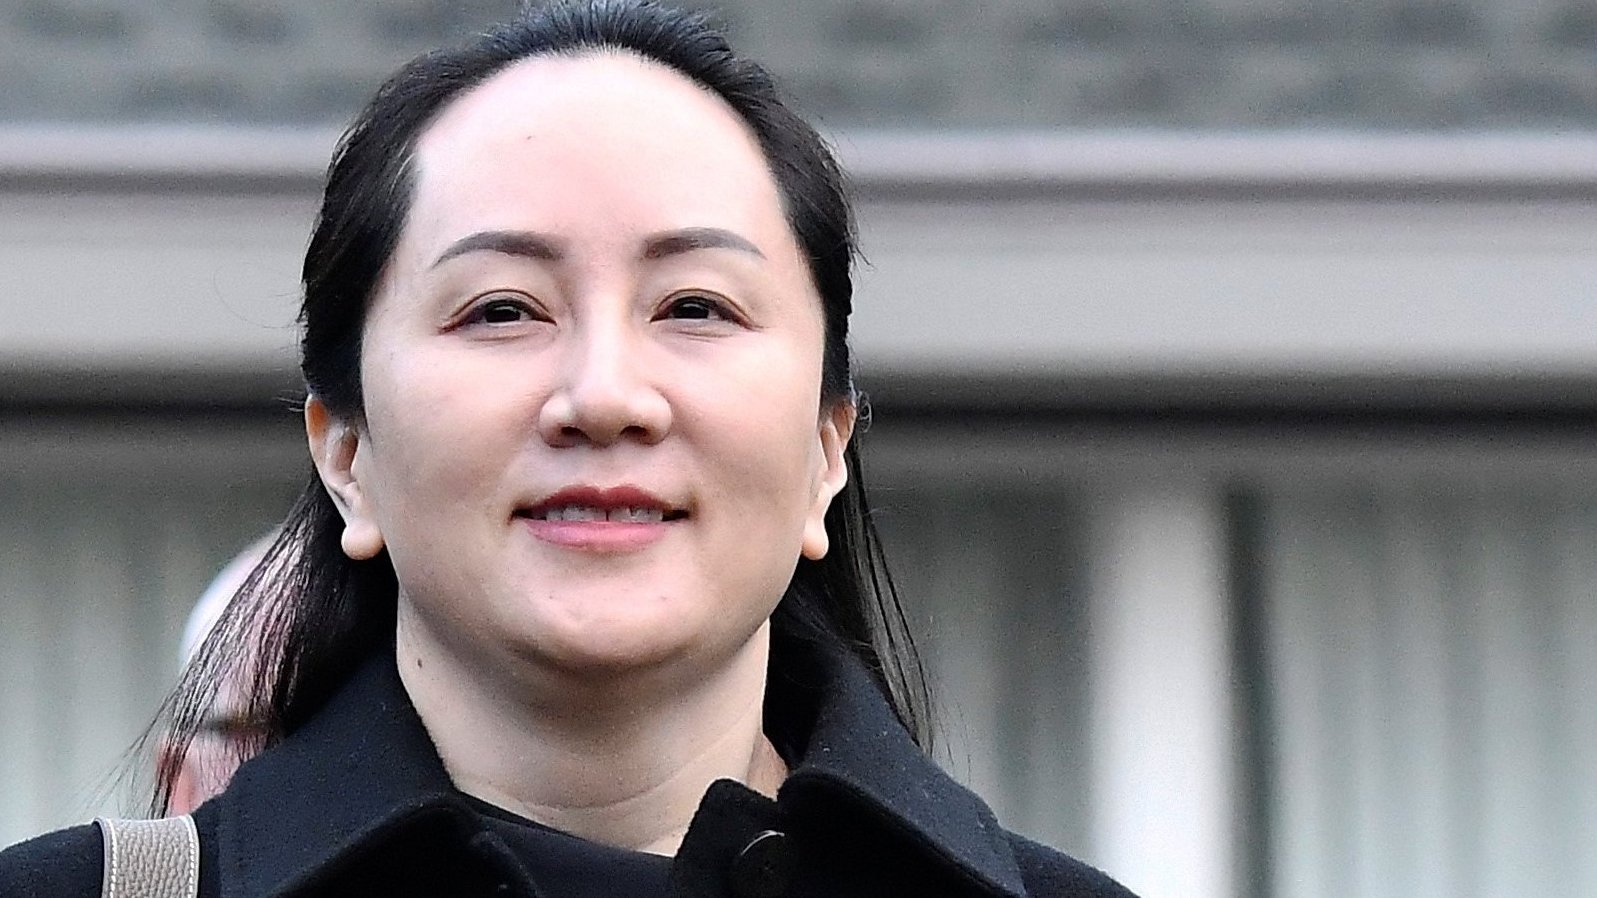 Meng Wanzhou 'irreplaceable' to company, says Huawei executive - BBC News